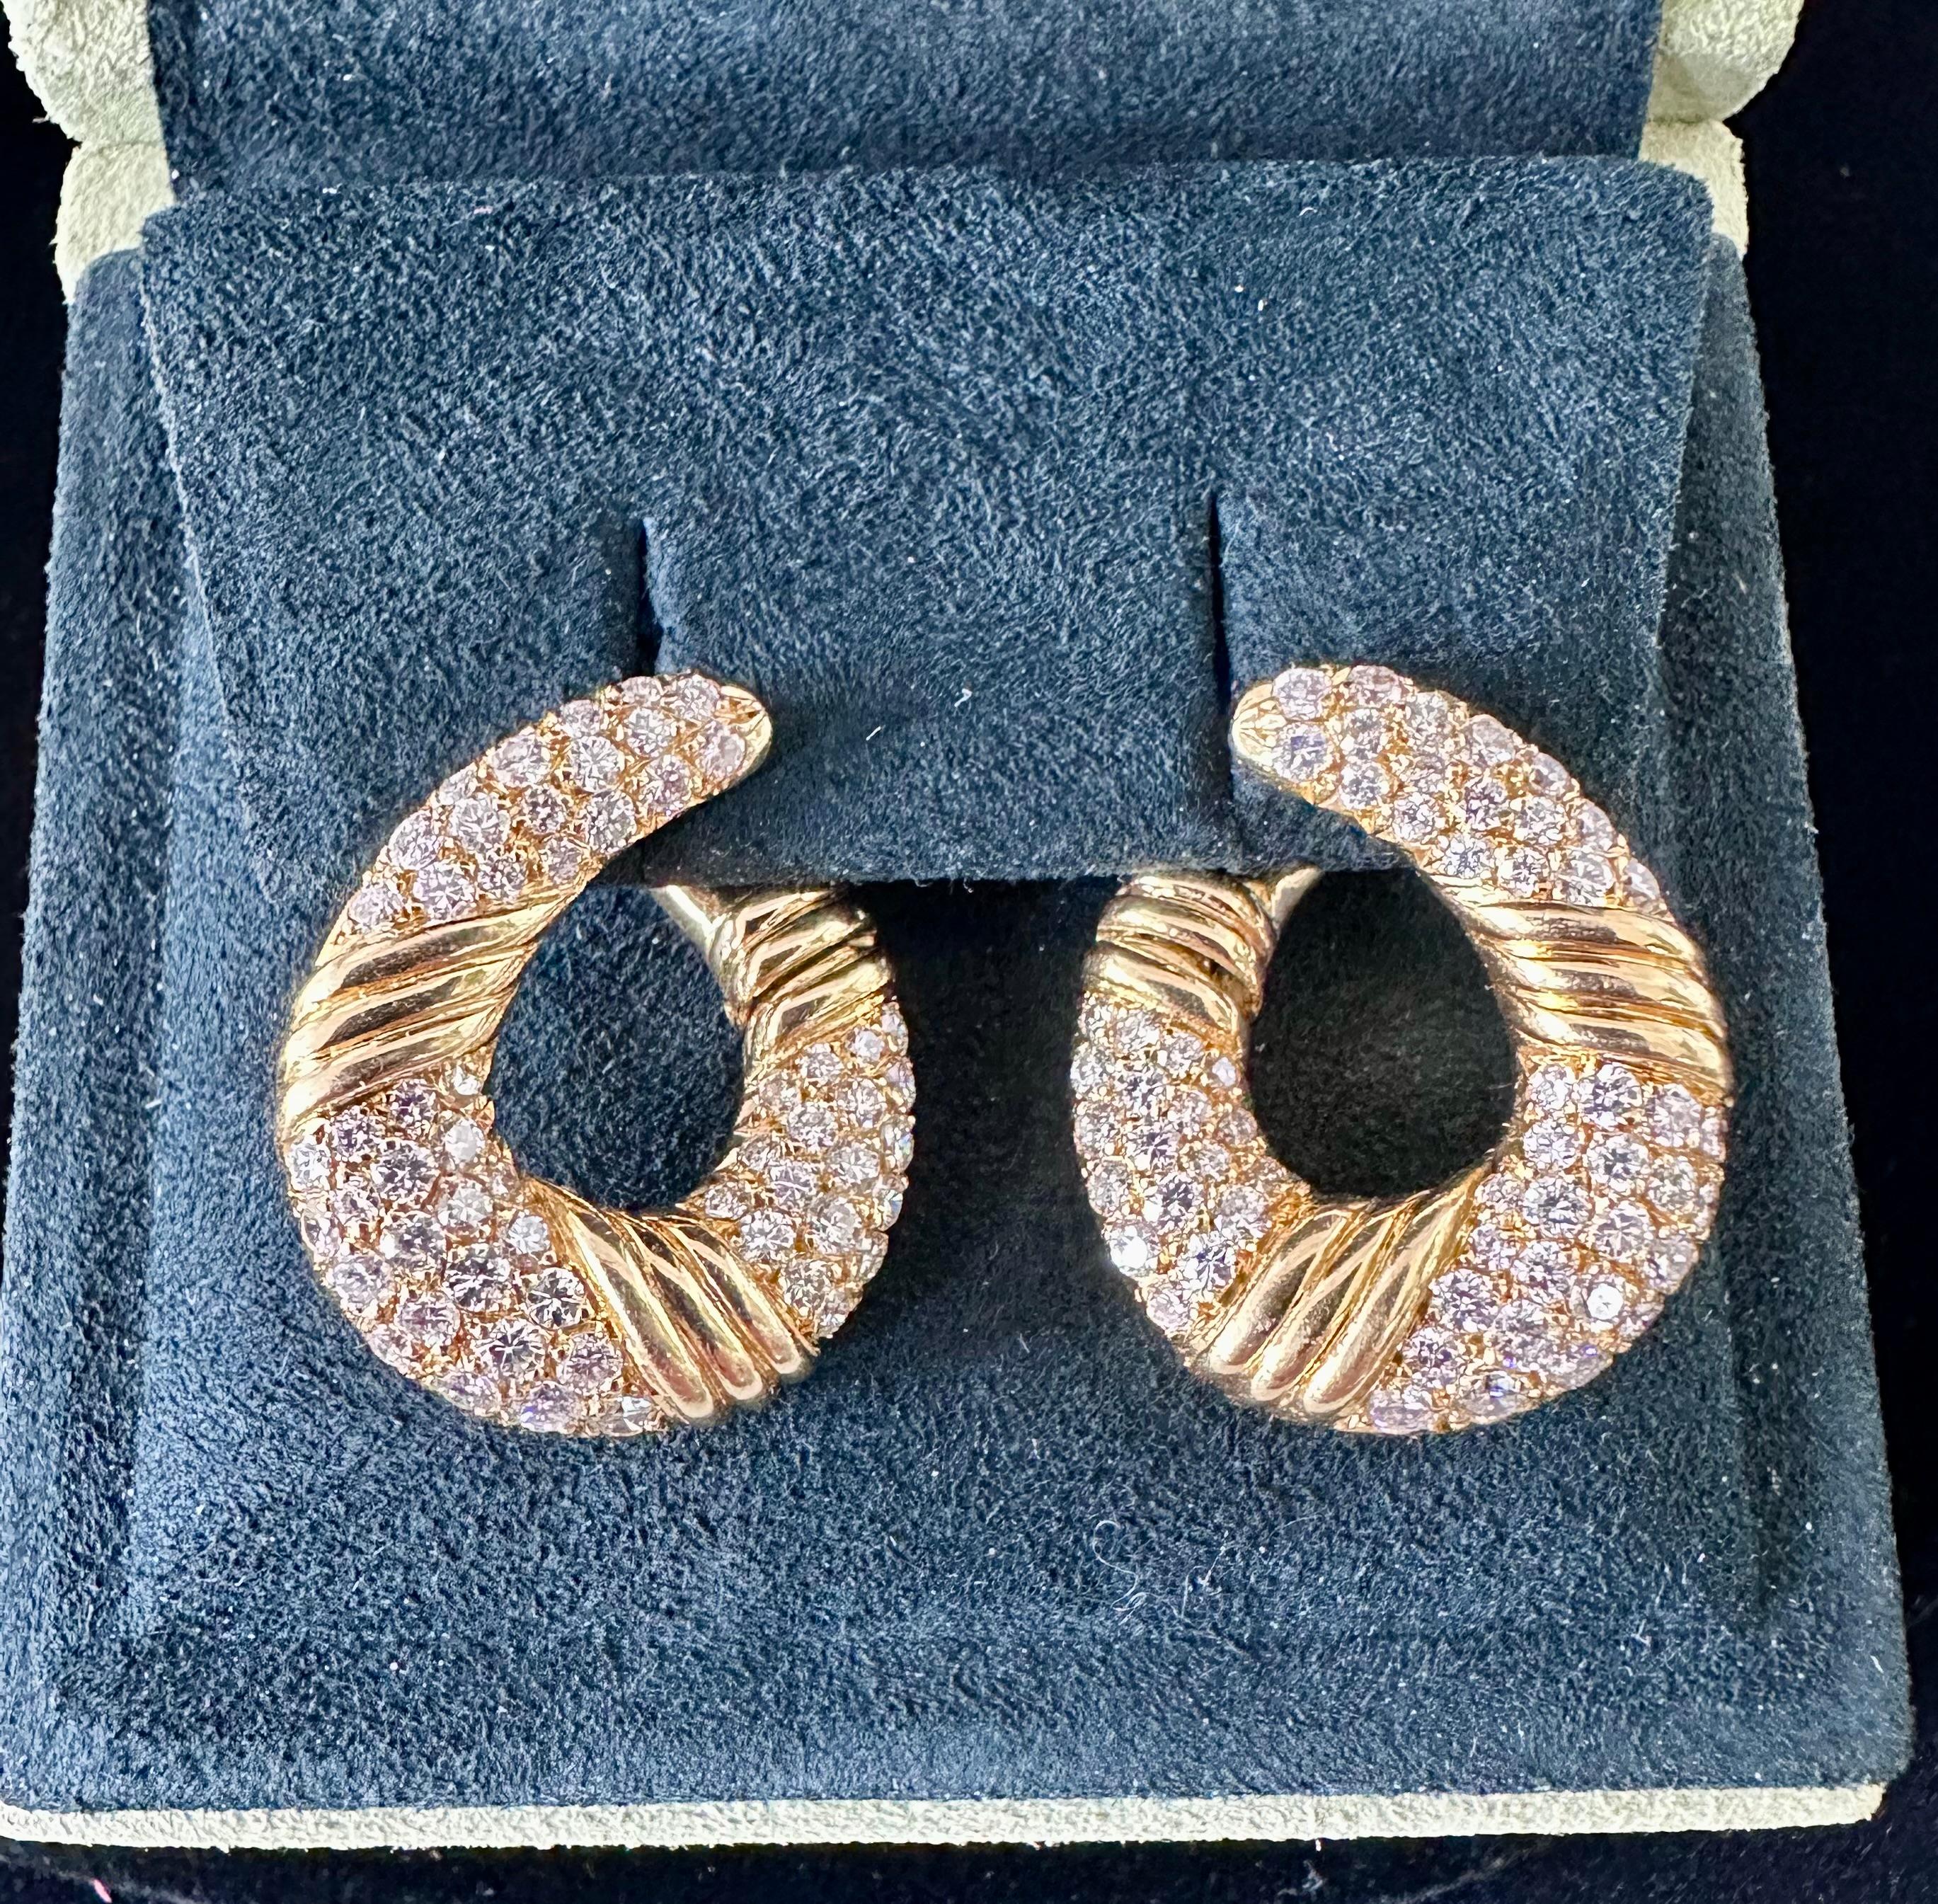 Van Cleef and Arpels Earrings of a Hoop Designed Earrings. Rows of Tapering Pave Set Diamonds Est Weight 2.30 cts. Hinge opening Mechanism signed Van Cleef and Arpels & numbered circa 1990 stamped 750 for 18k Yellow Gold 
Dimension: 25mm X 18mm
